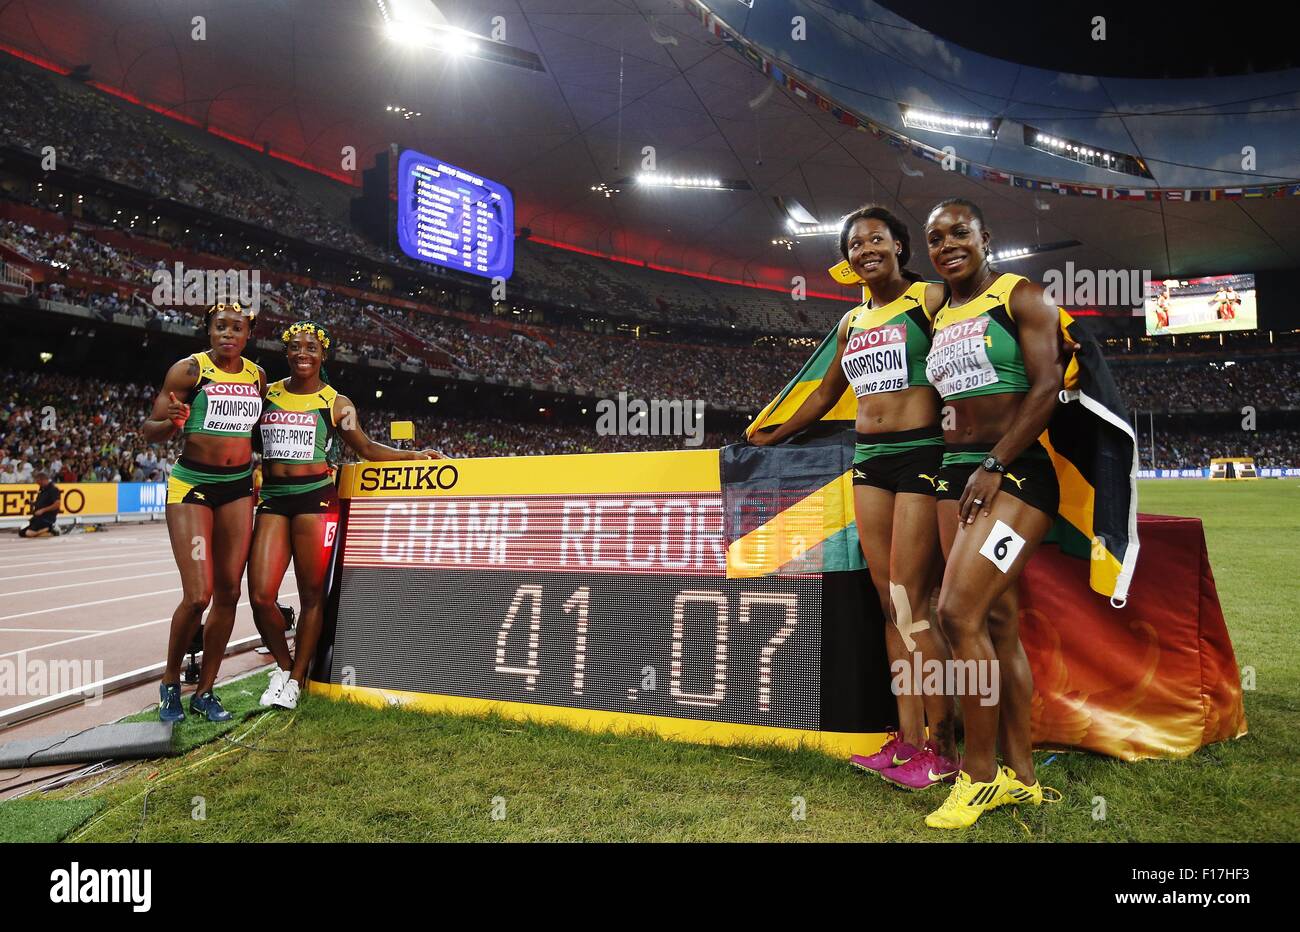 Beijing, China. 29th Aug, 2015. (From L to R)Jamaica's Elaine Thompson, Shelly-Ann Fraser-Pryce, Natasha Morrison and Veronica Campbell-Brown pose with 'Championships Record' board after winning the women's 4x100m relay final at the 2015 IAAF World Championships at the 'Bird's Nest' National Stadium in Beijing, capital of China, Aug. 29, 2015. Credit:  Wang Lili/Xinhua/Alamy Live News Stock Photo